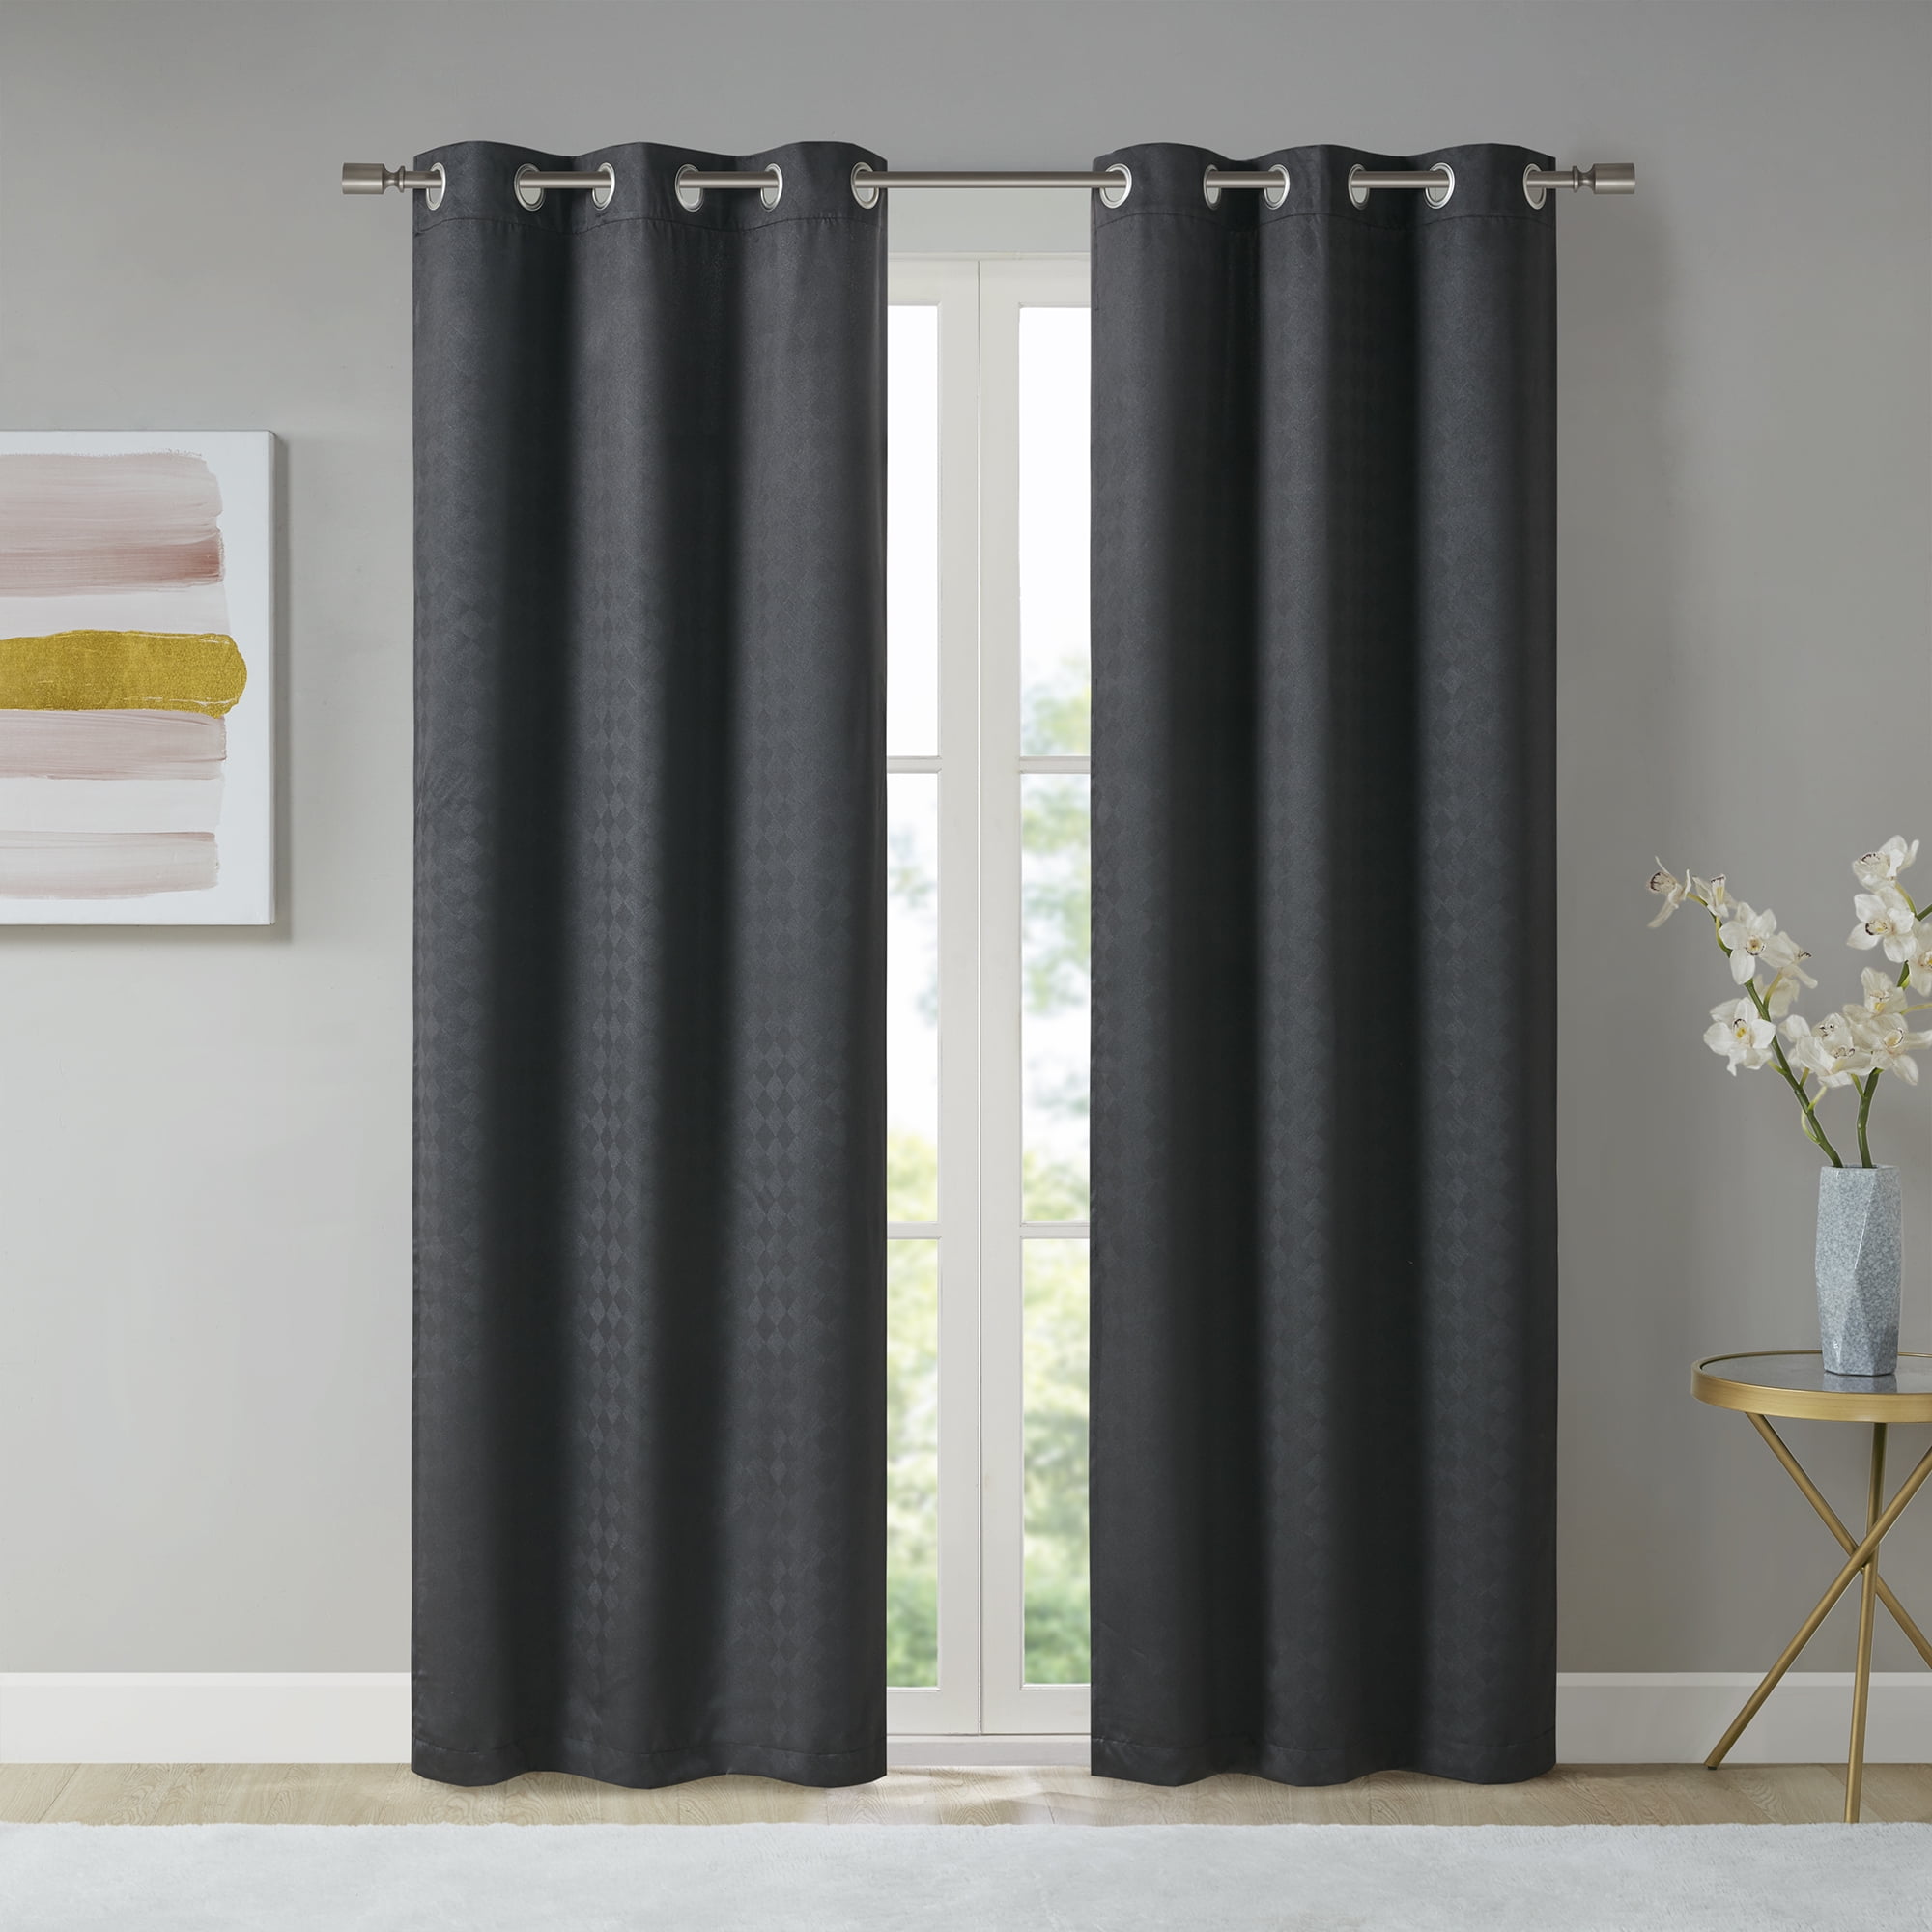 Hot Details about   Barossa Design Waterproof Extra Long Shower Curtain Or Liner 72 X 84 Inches 